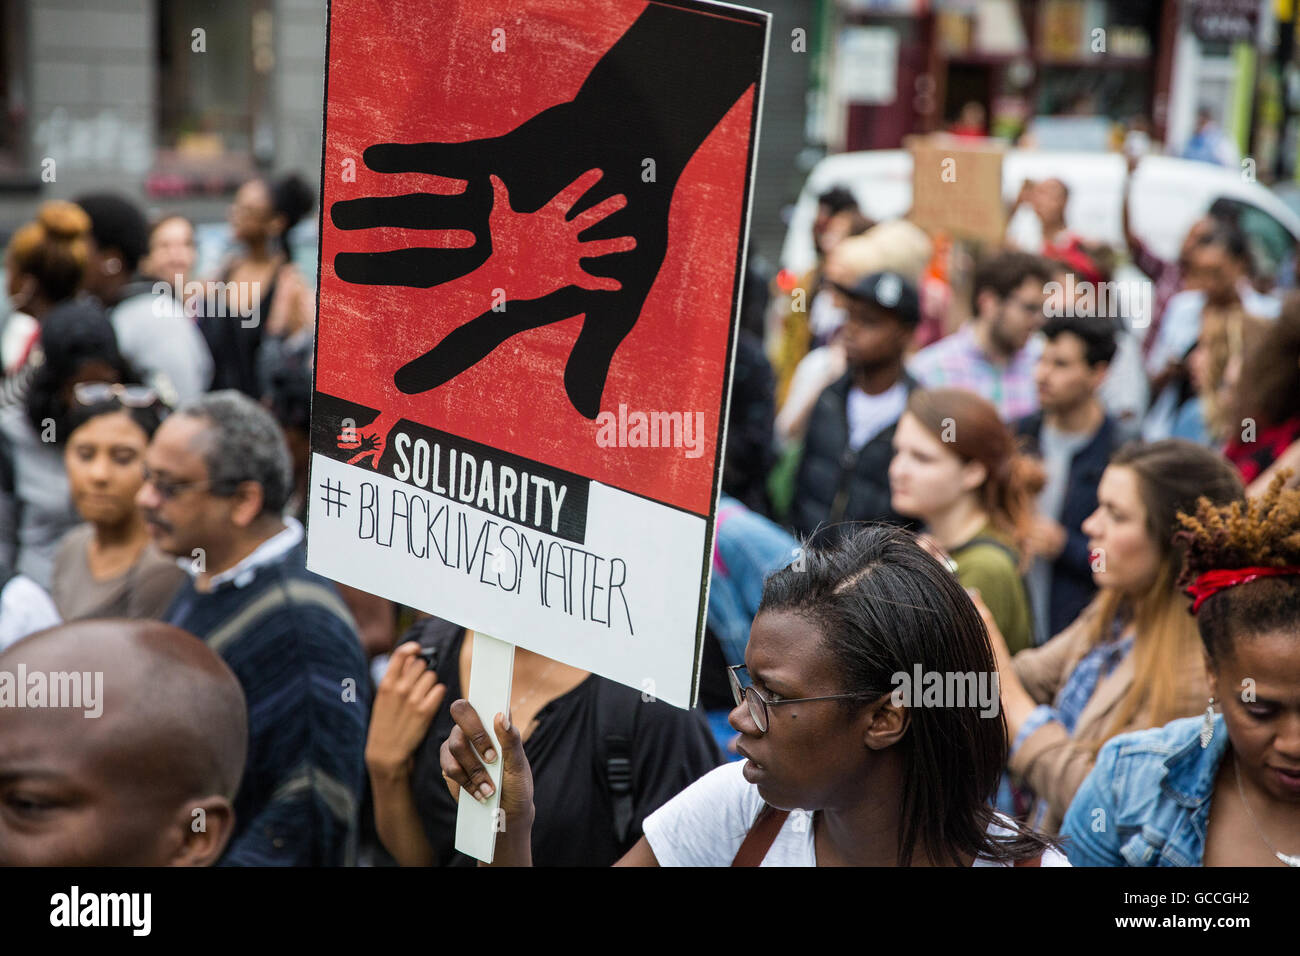 London, UK. 9th July, 2016. Campaigners from groups including Black Lives Matter UK march in Brixton in solidarity with Alton Sterling and Philando Castile, who were fatally shot by police in Dallas and Minnesota last week. Those attending the march also remembered many other victims of police violence, both in the US and in the UK. Stock Photo